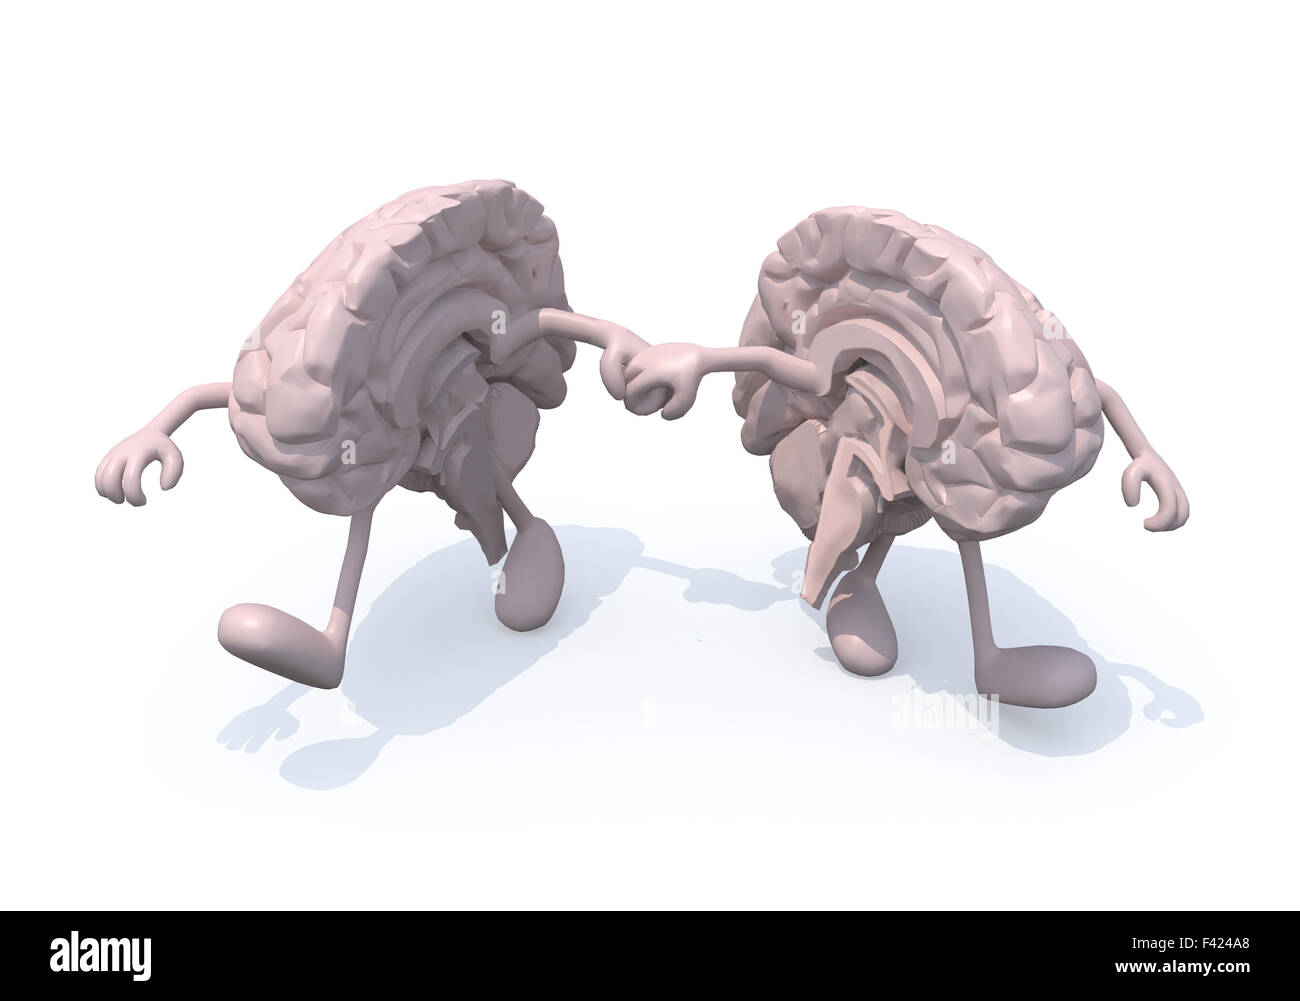 two half brains that walk hand in hand, 3d illustration Stock Photo